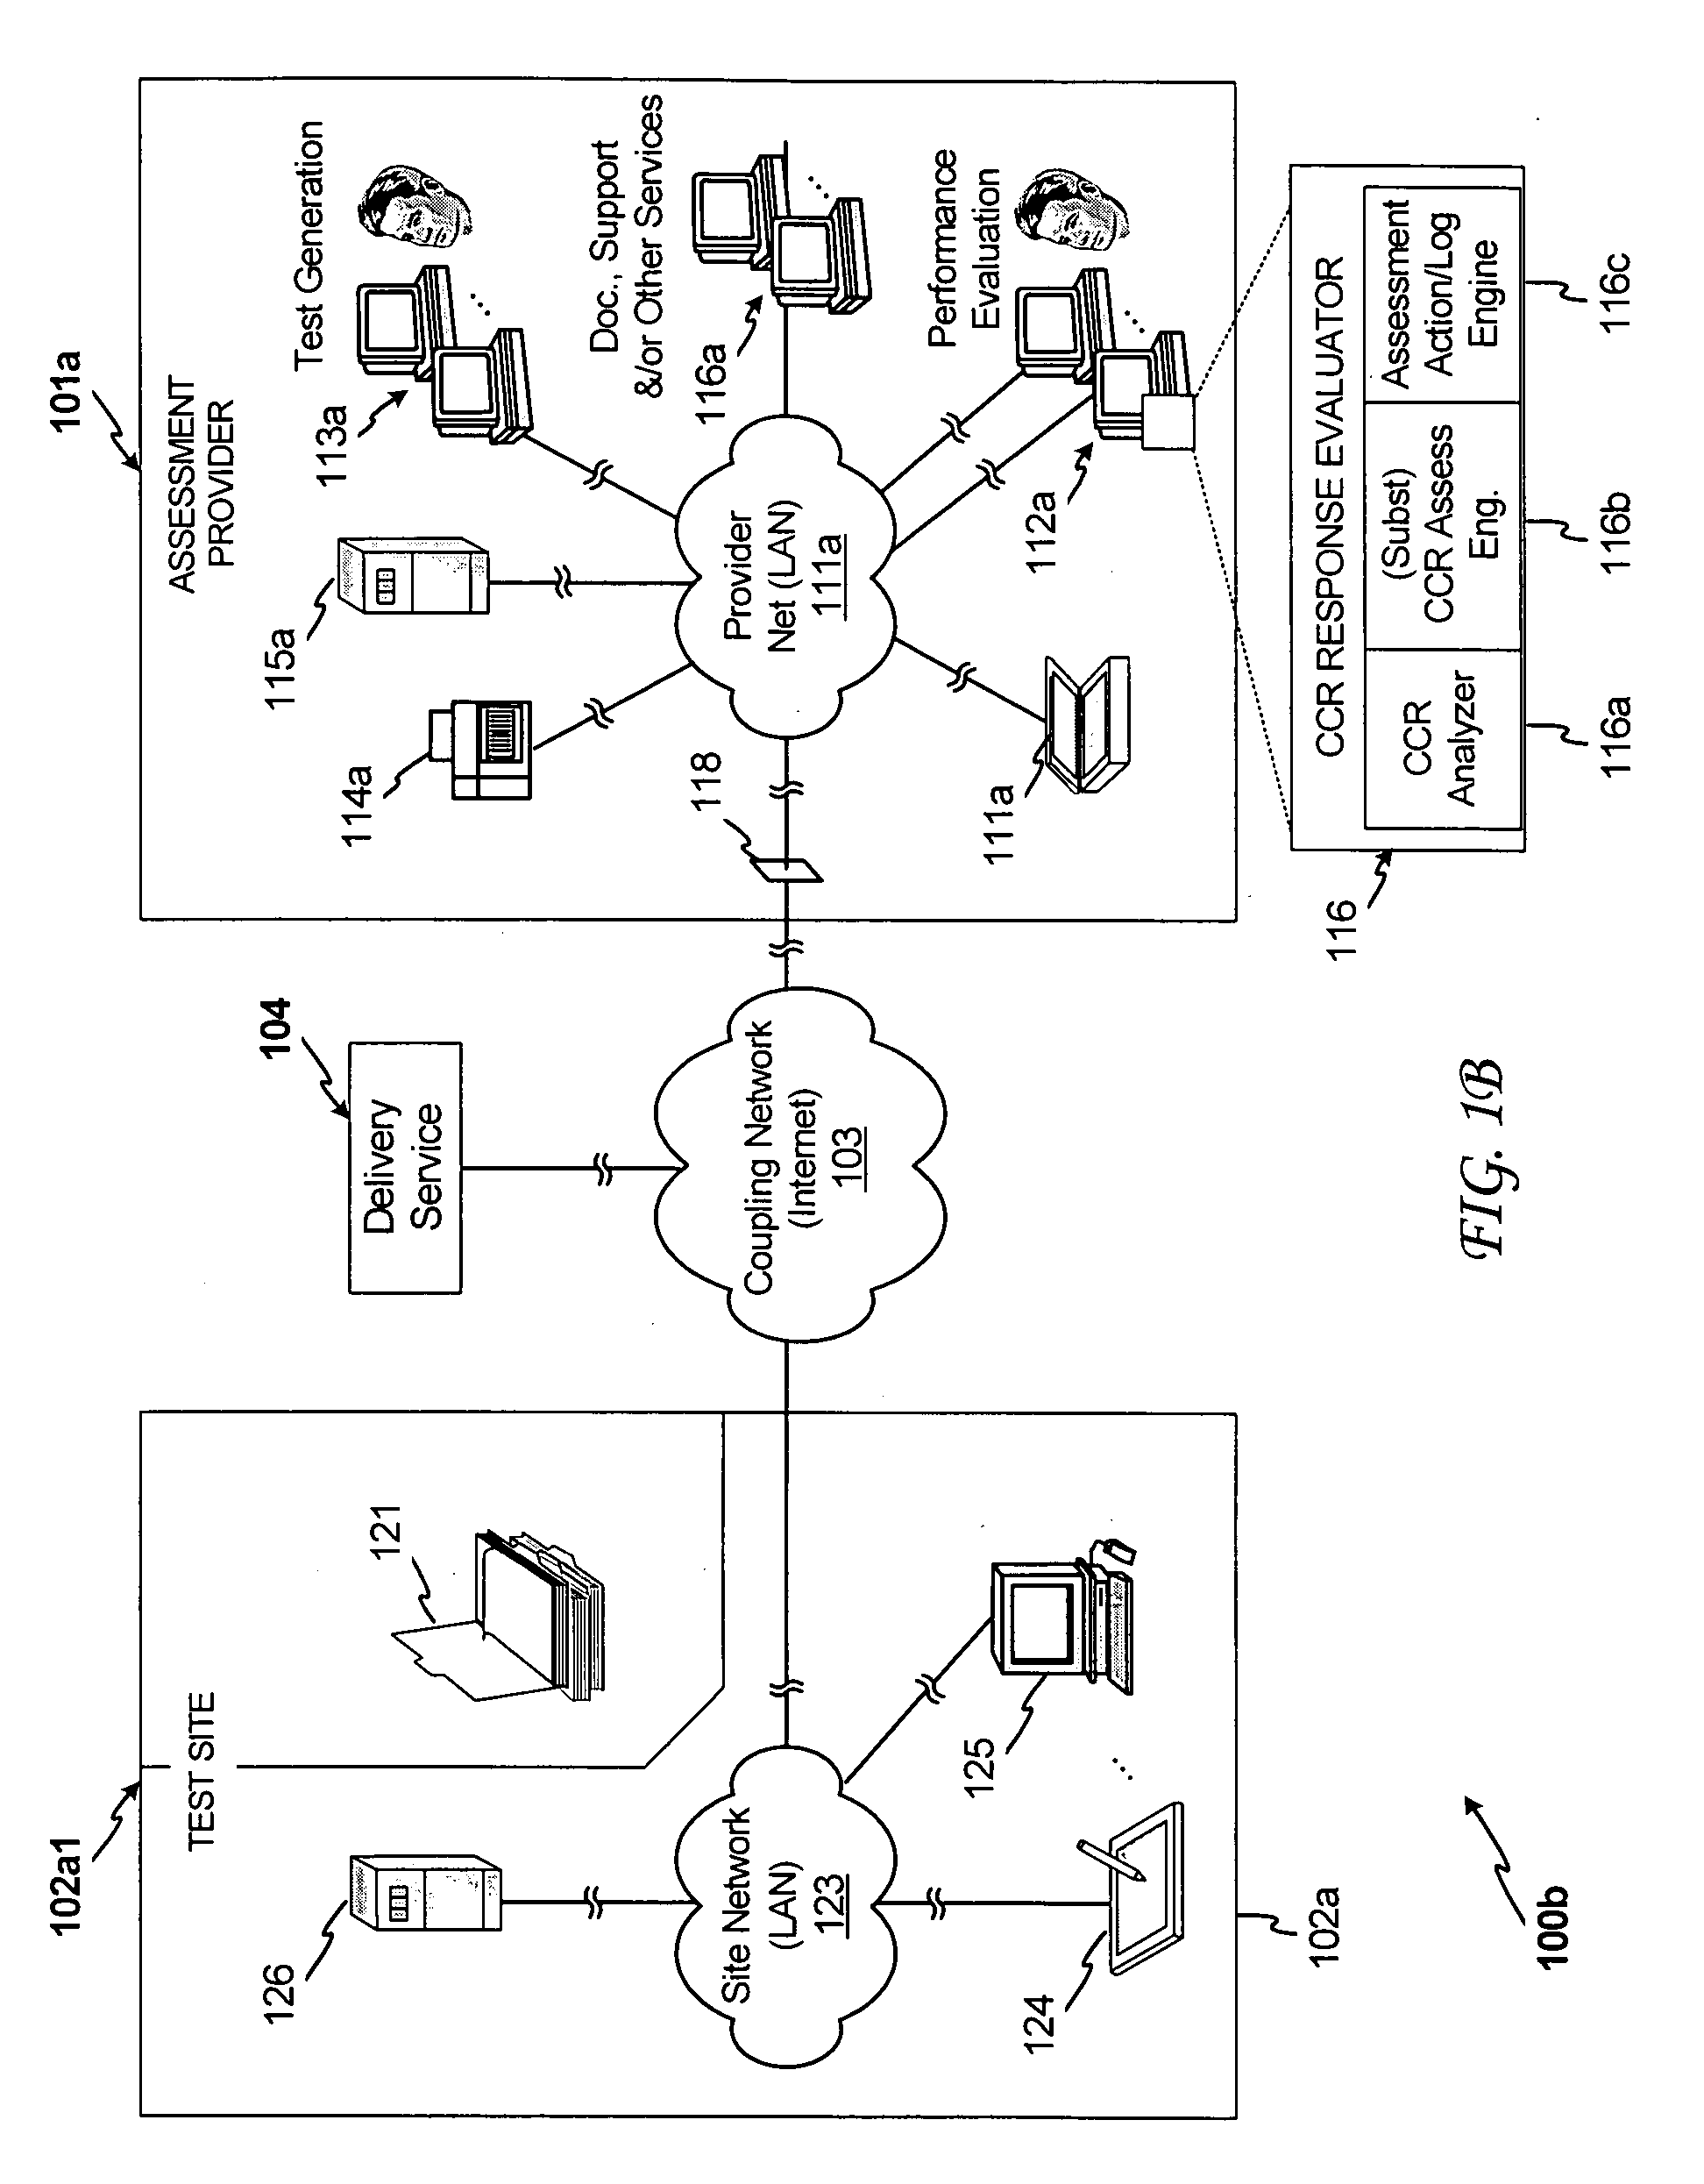 System and method for automated assessment of constrained constructed responses